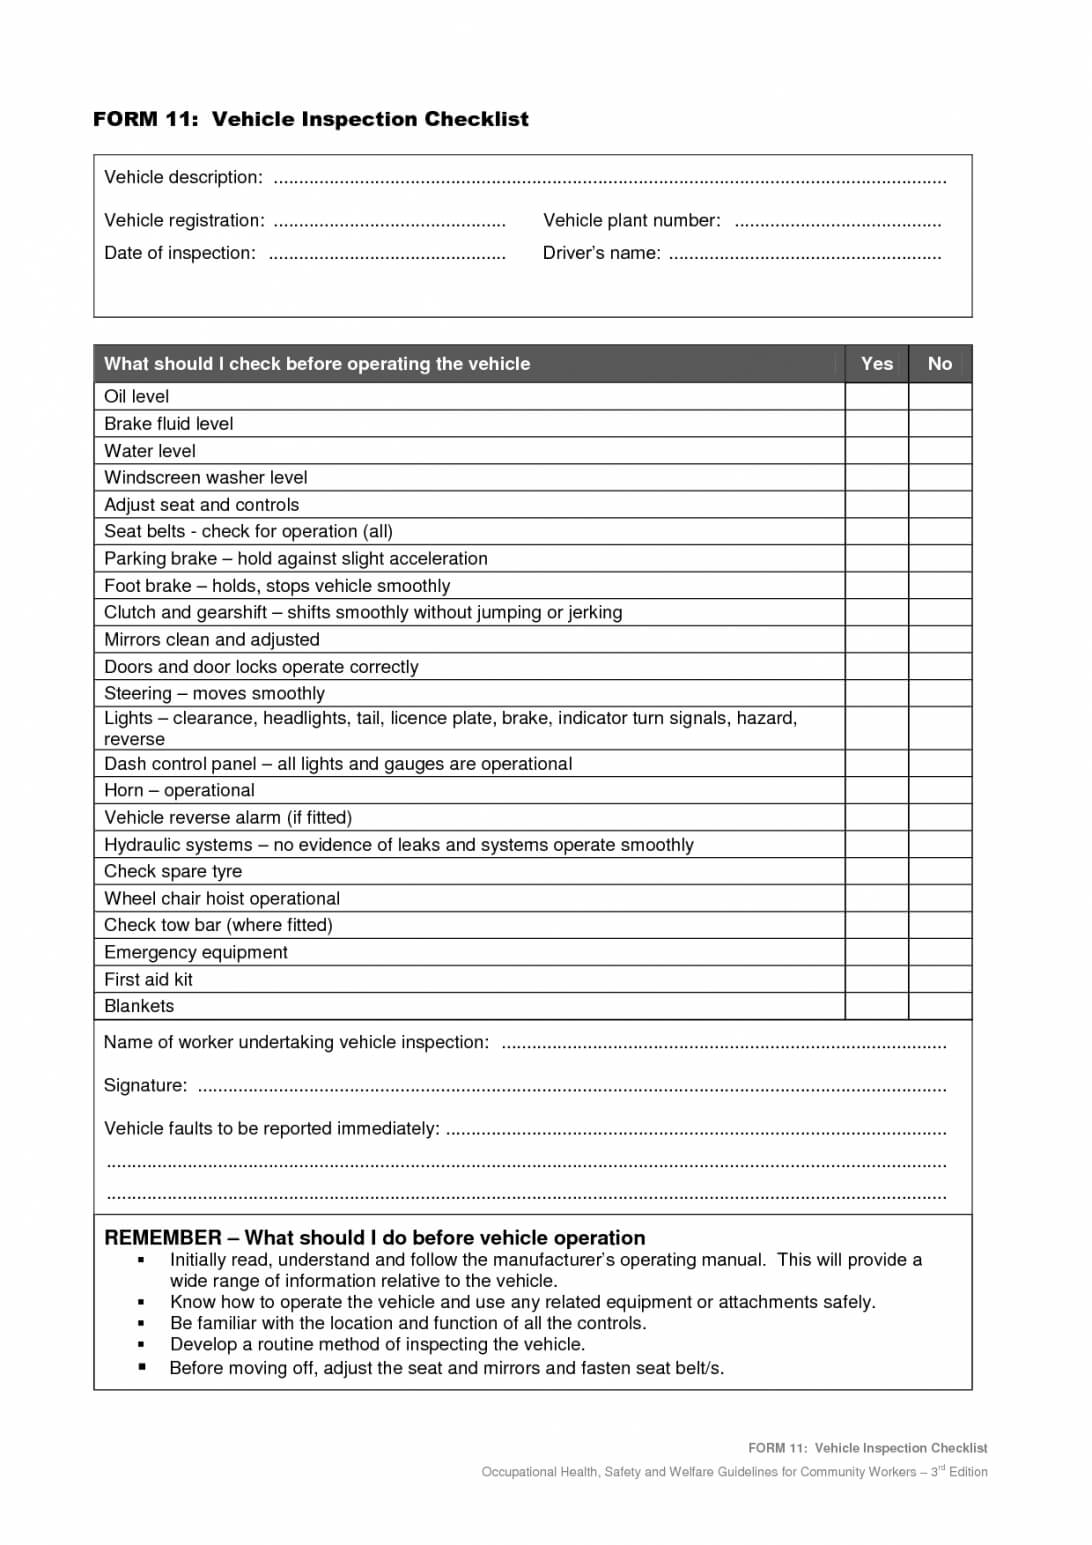 Vehicle Safety Inspection Checklist Form Maintenance Report For Vehicle Inspection Report Template